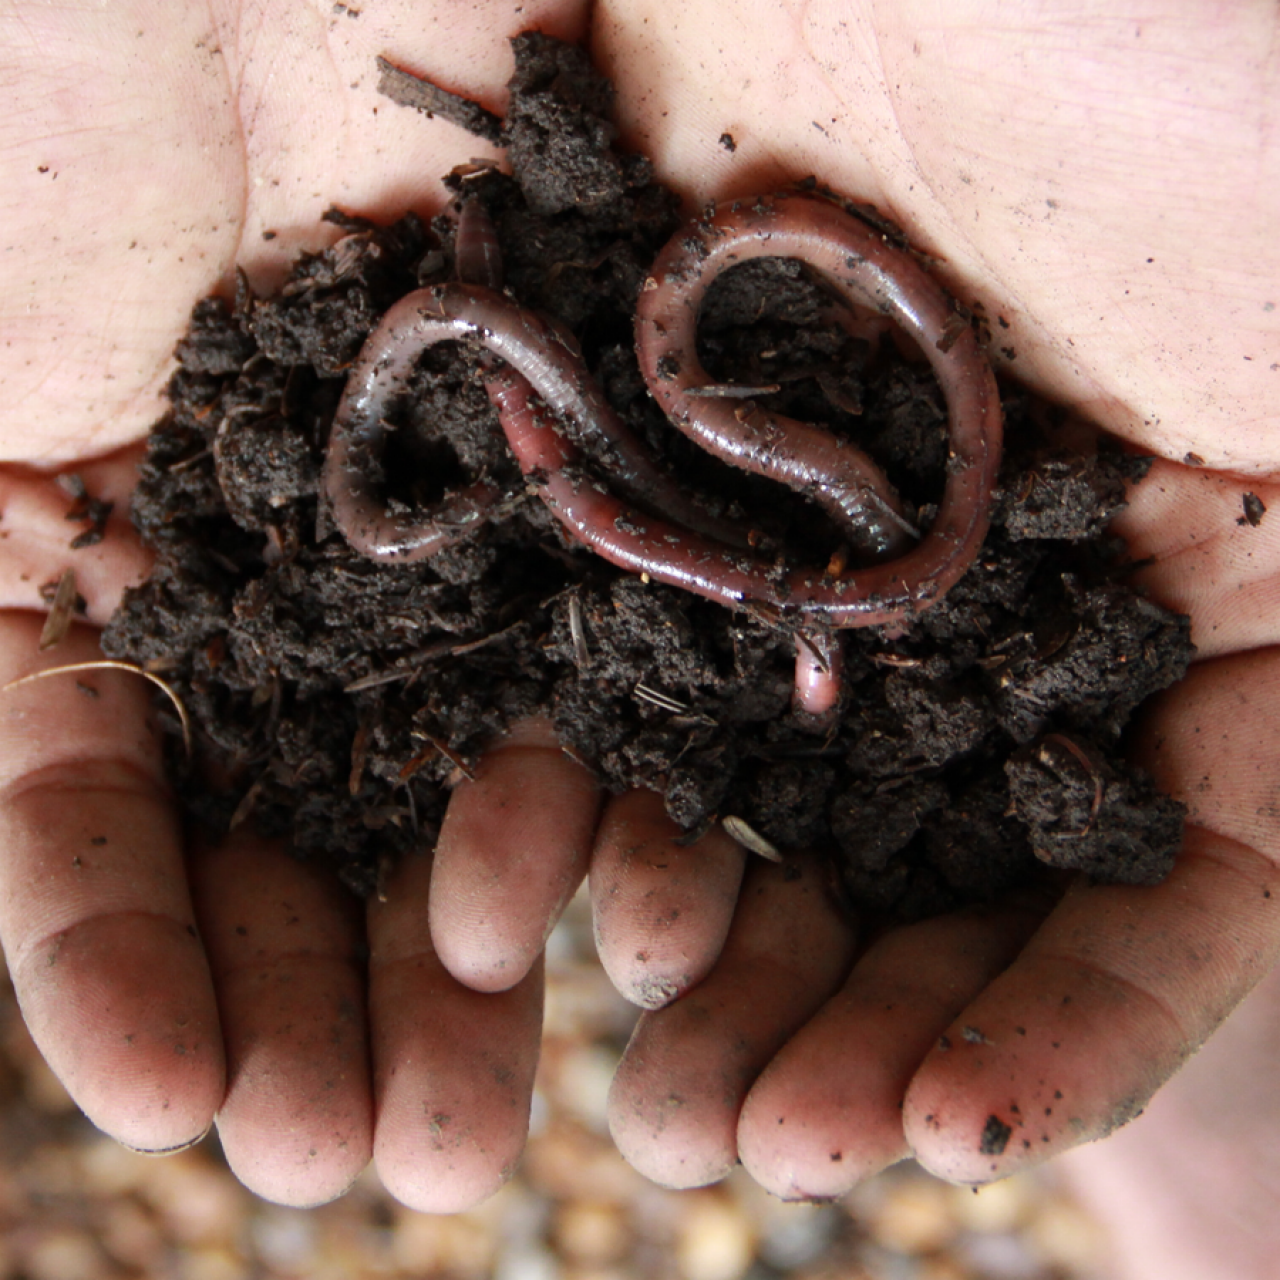 Earth's helpers: Earthworms add nutrients to soil, Home And Garden